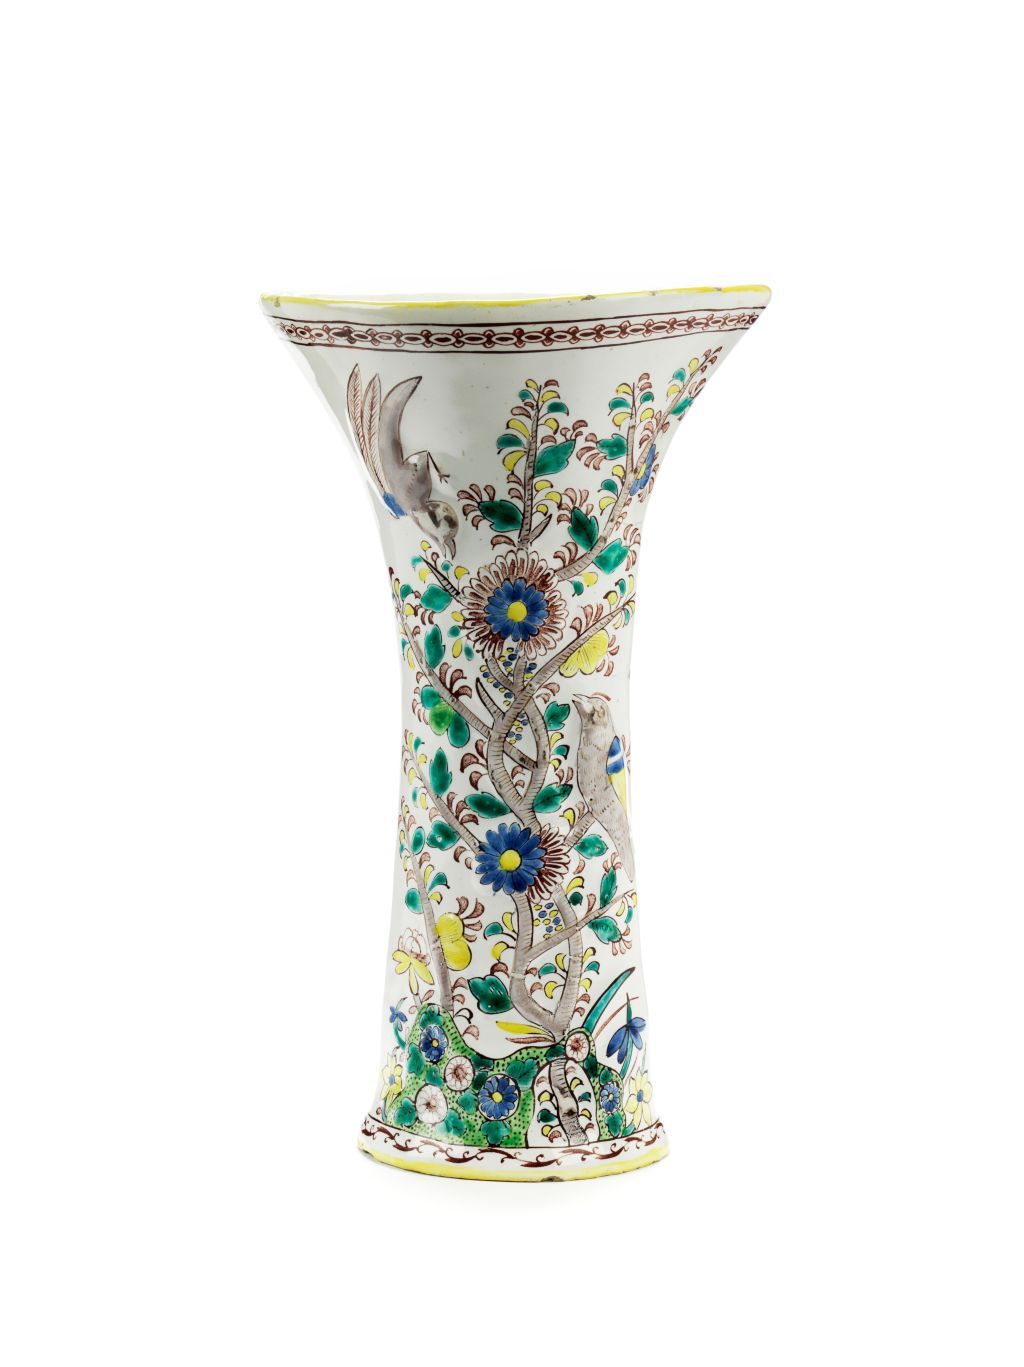 ansbach-faience-relief-vase-famille-verte-birds-flowers-18th-century